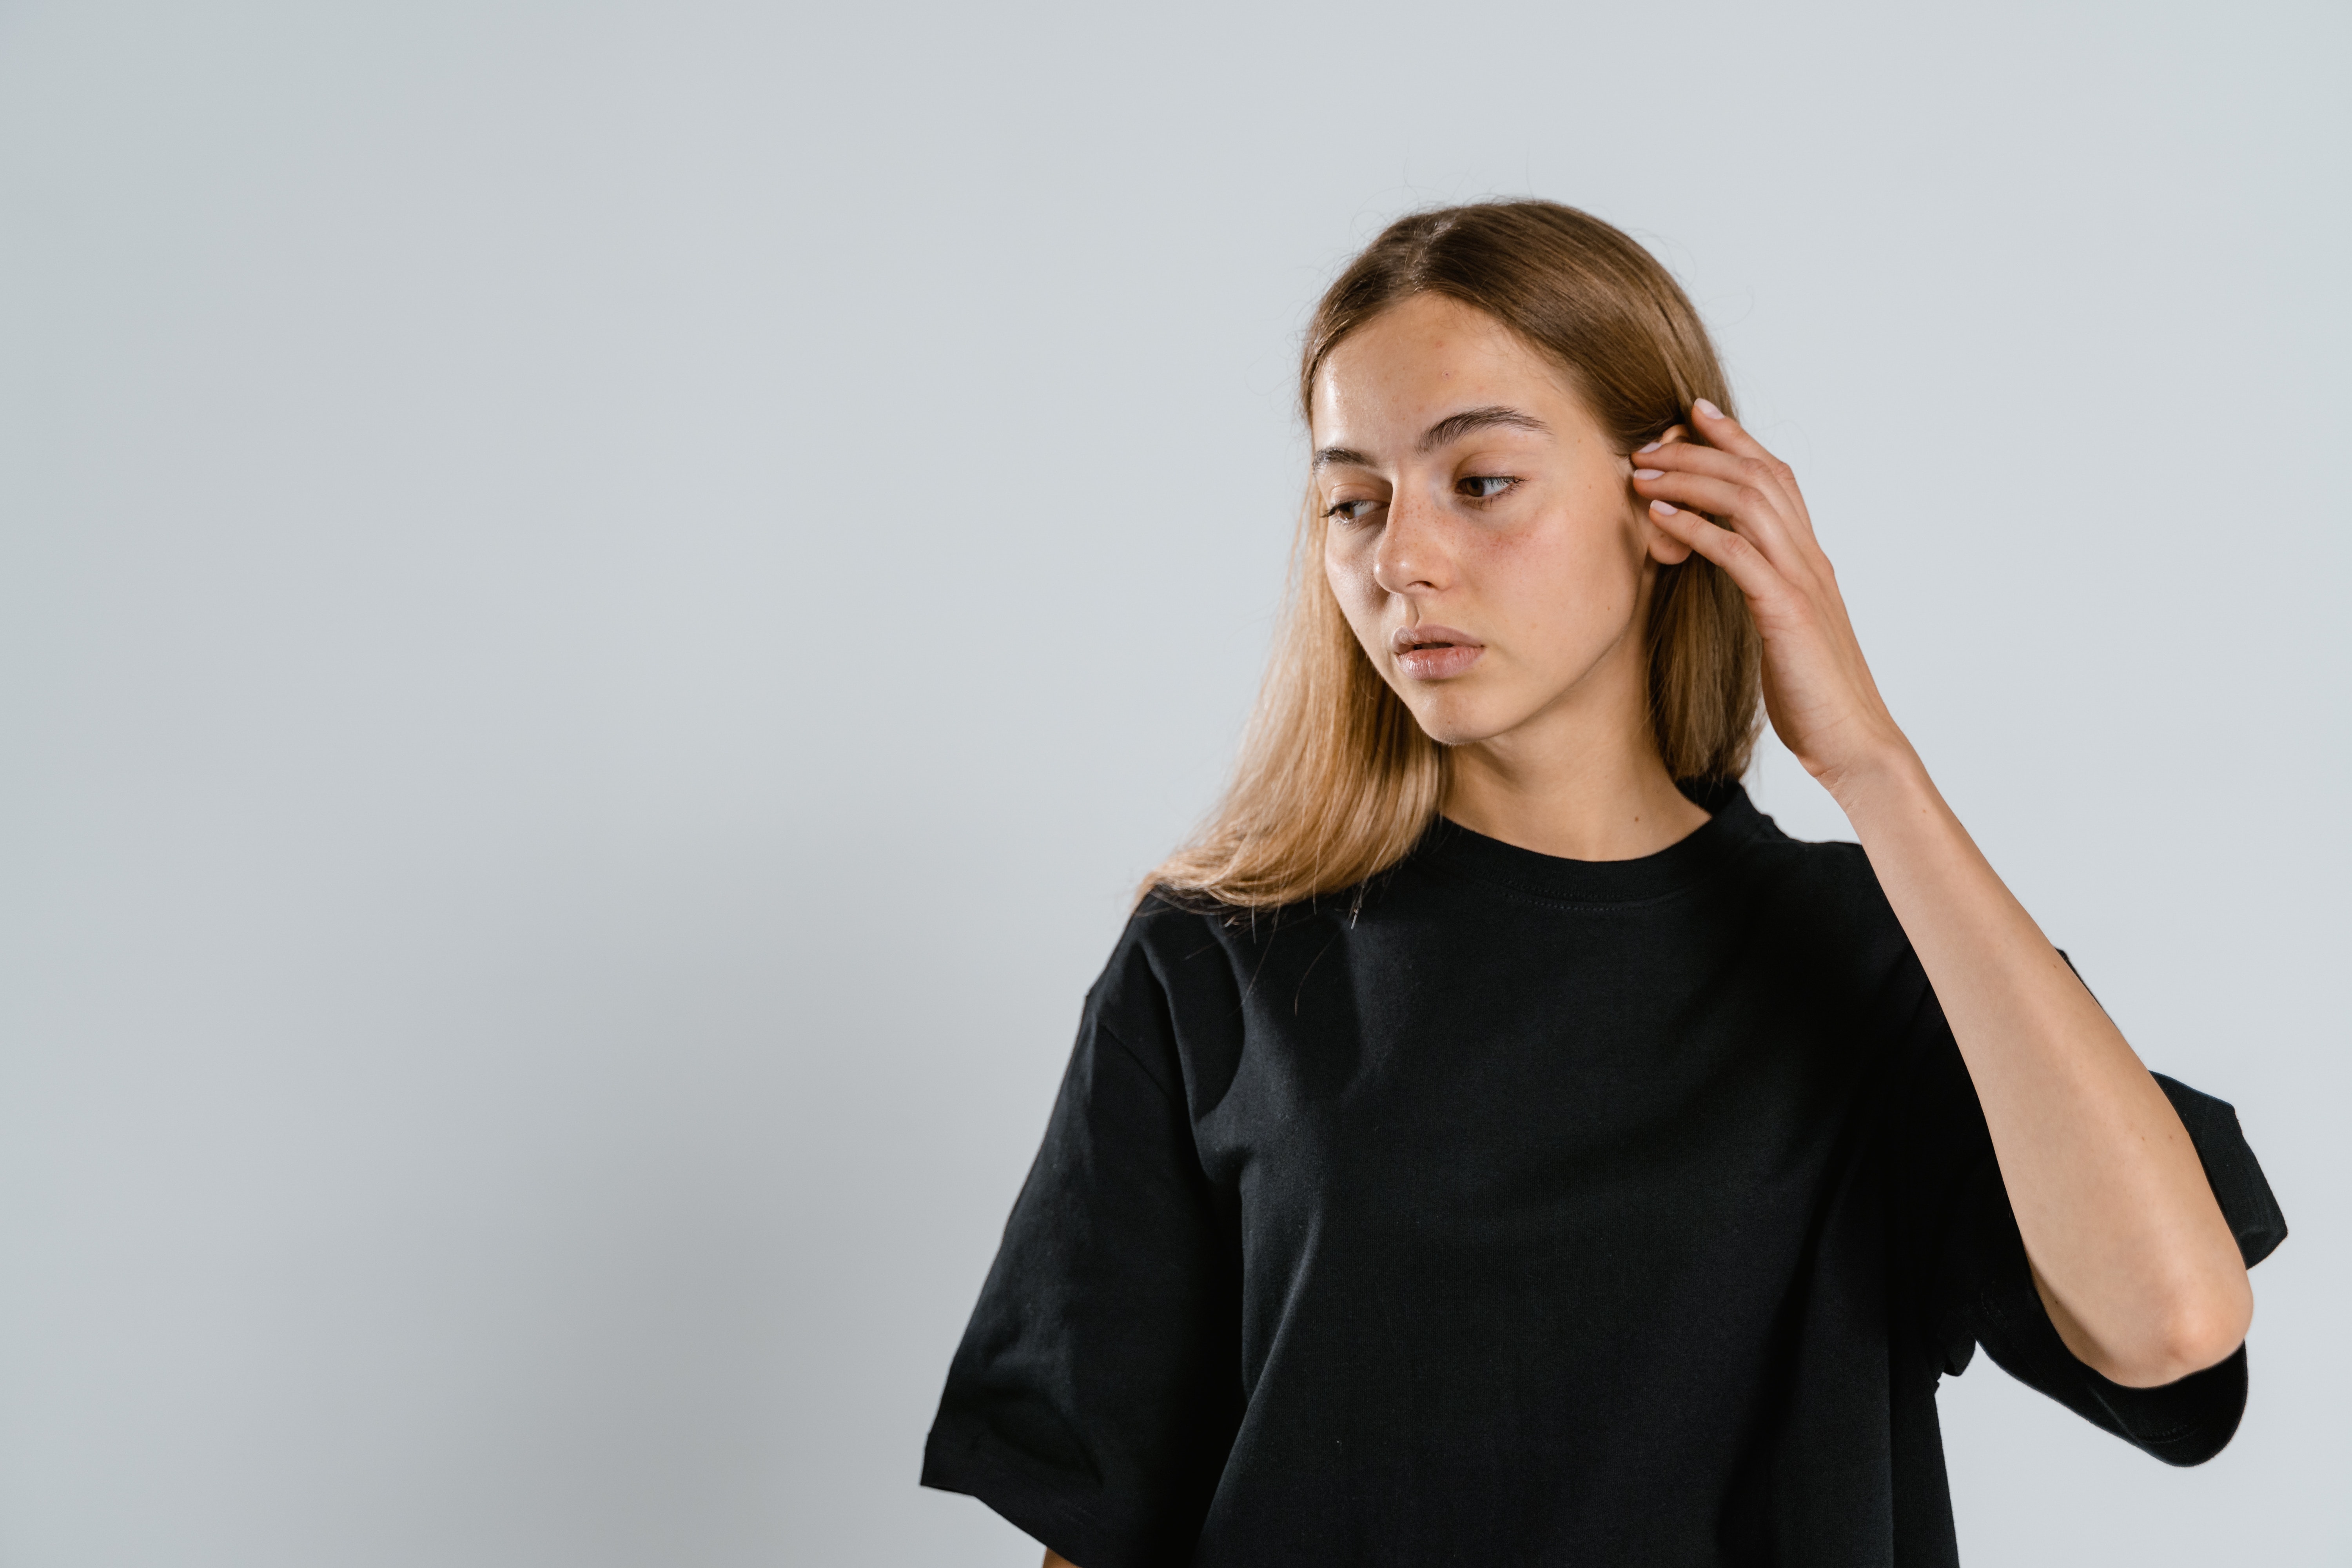 Lily was forced to wear plain clothes. | Source: Pexels